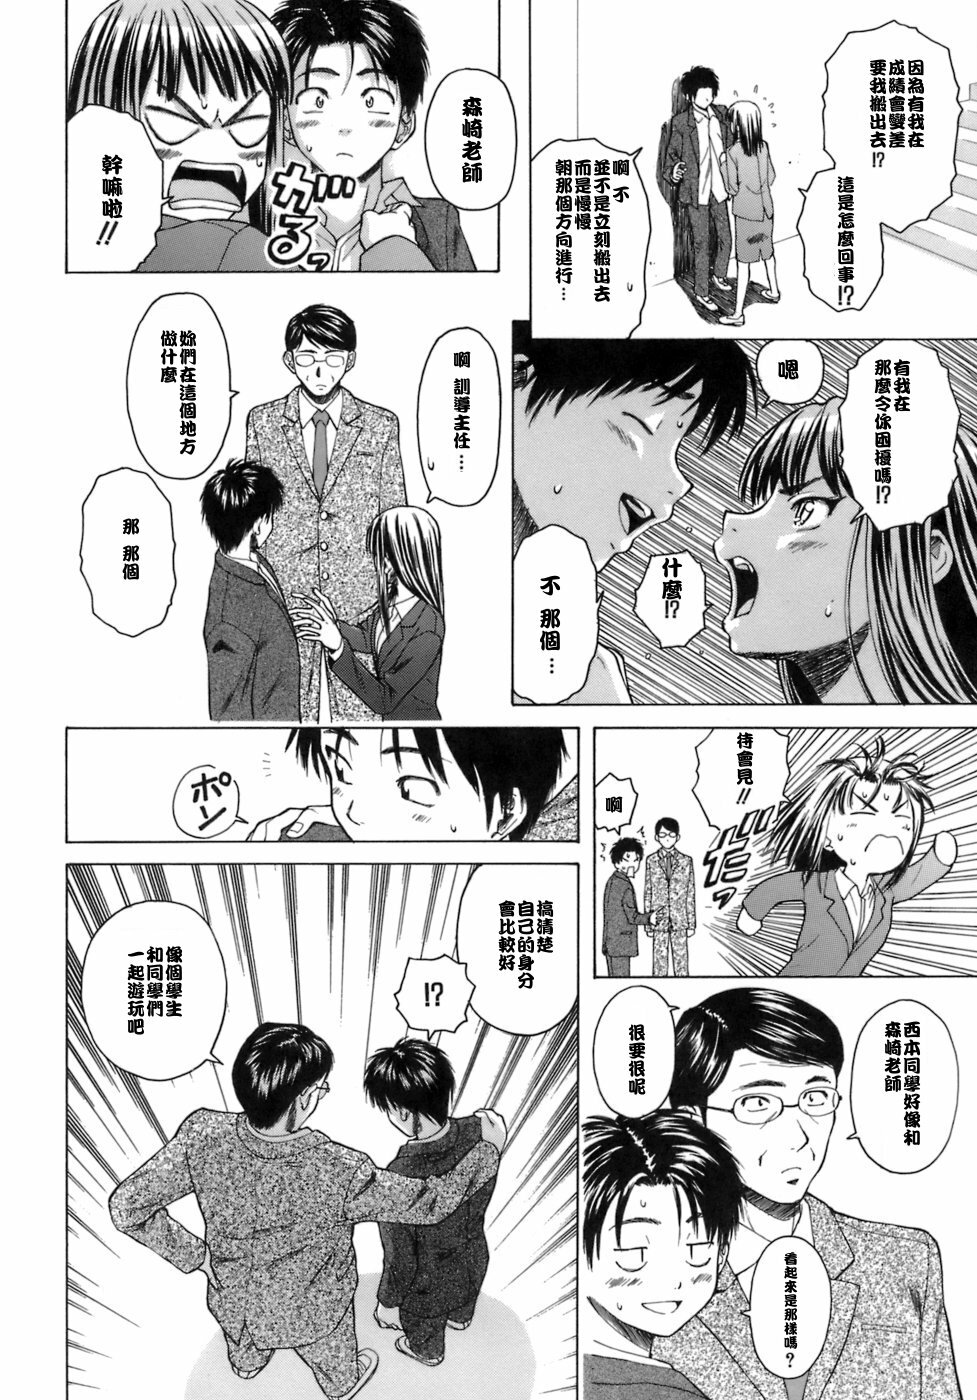 [Fuuga] Kyoushi to Seito to - Teacher and Student [Chinese] [悠月工房] page 51 full